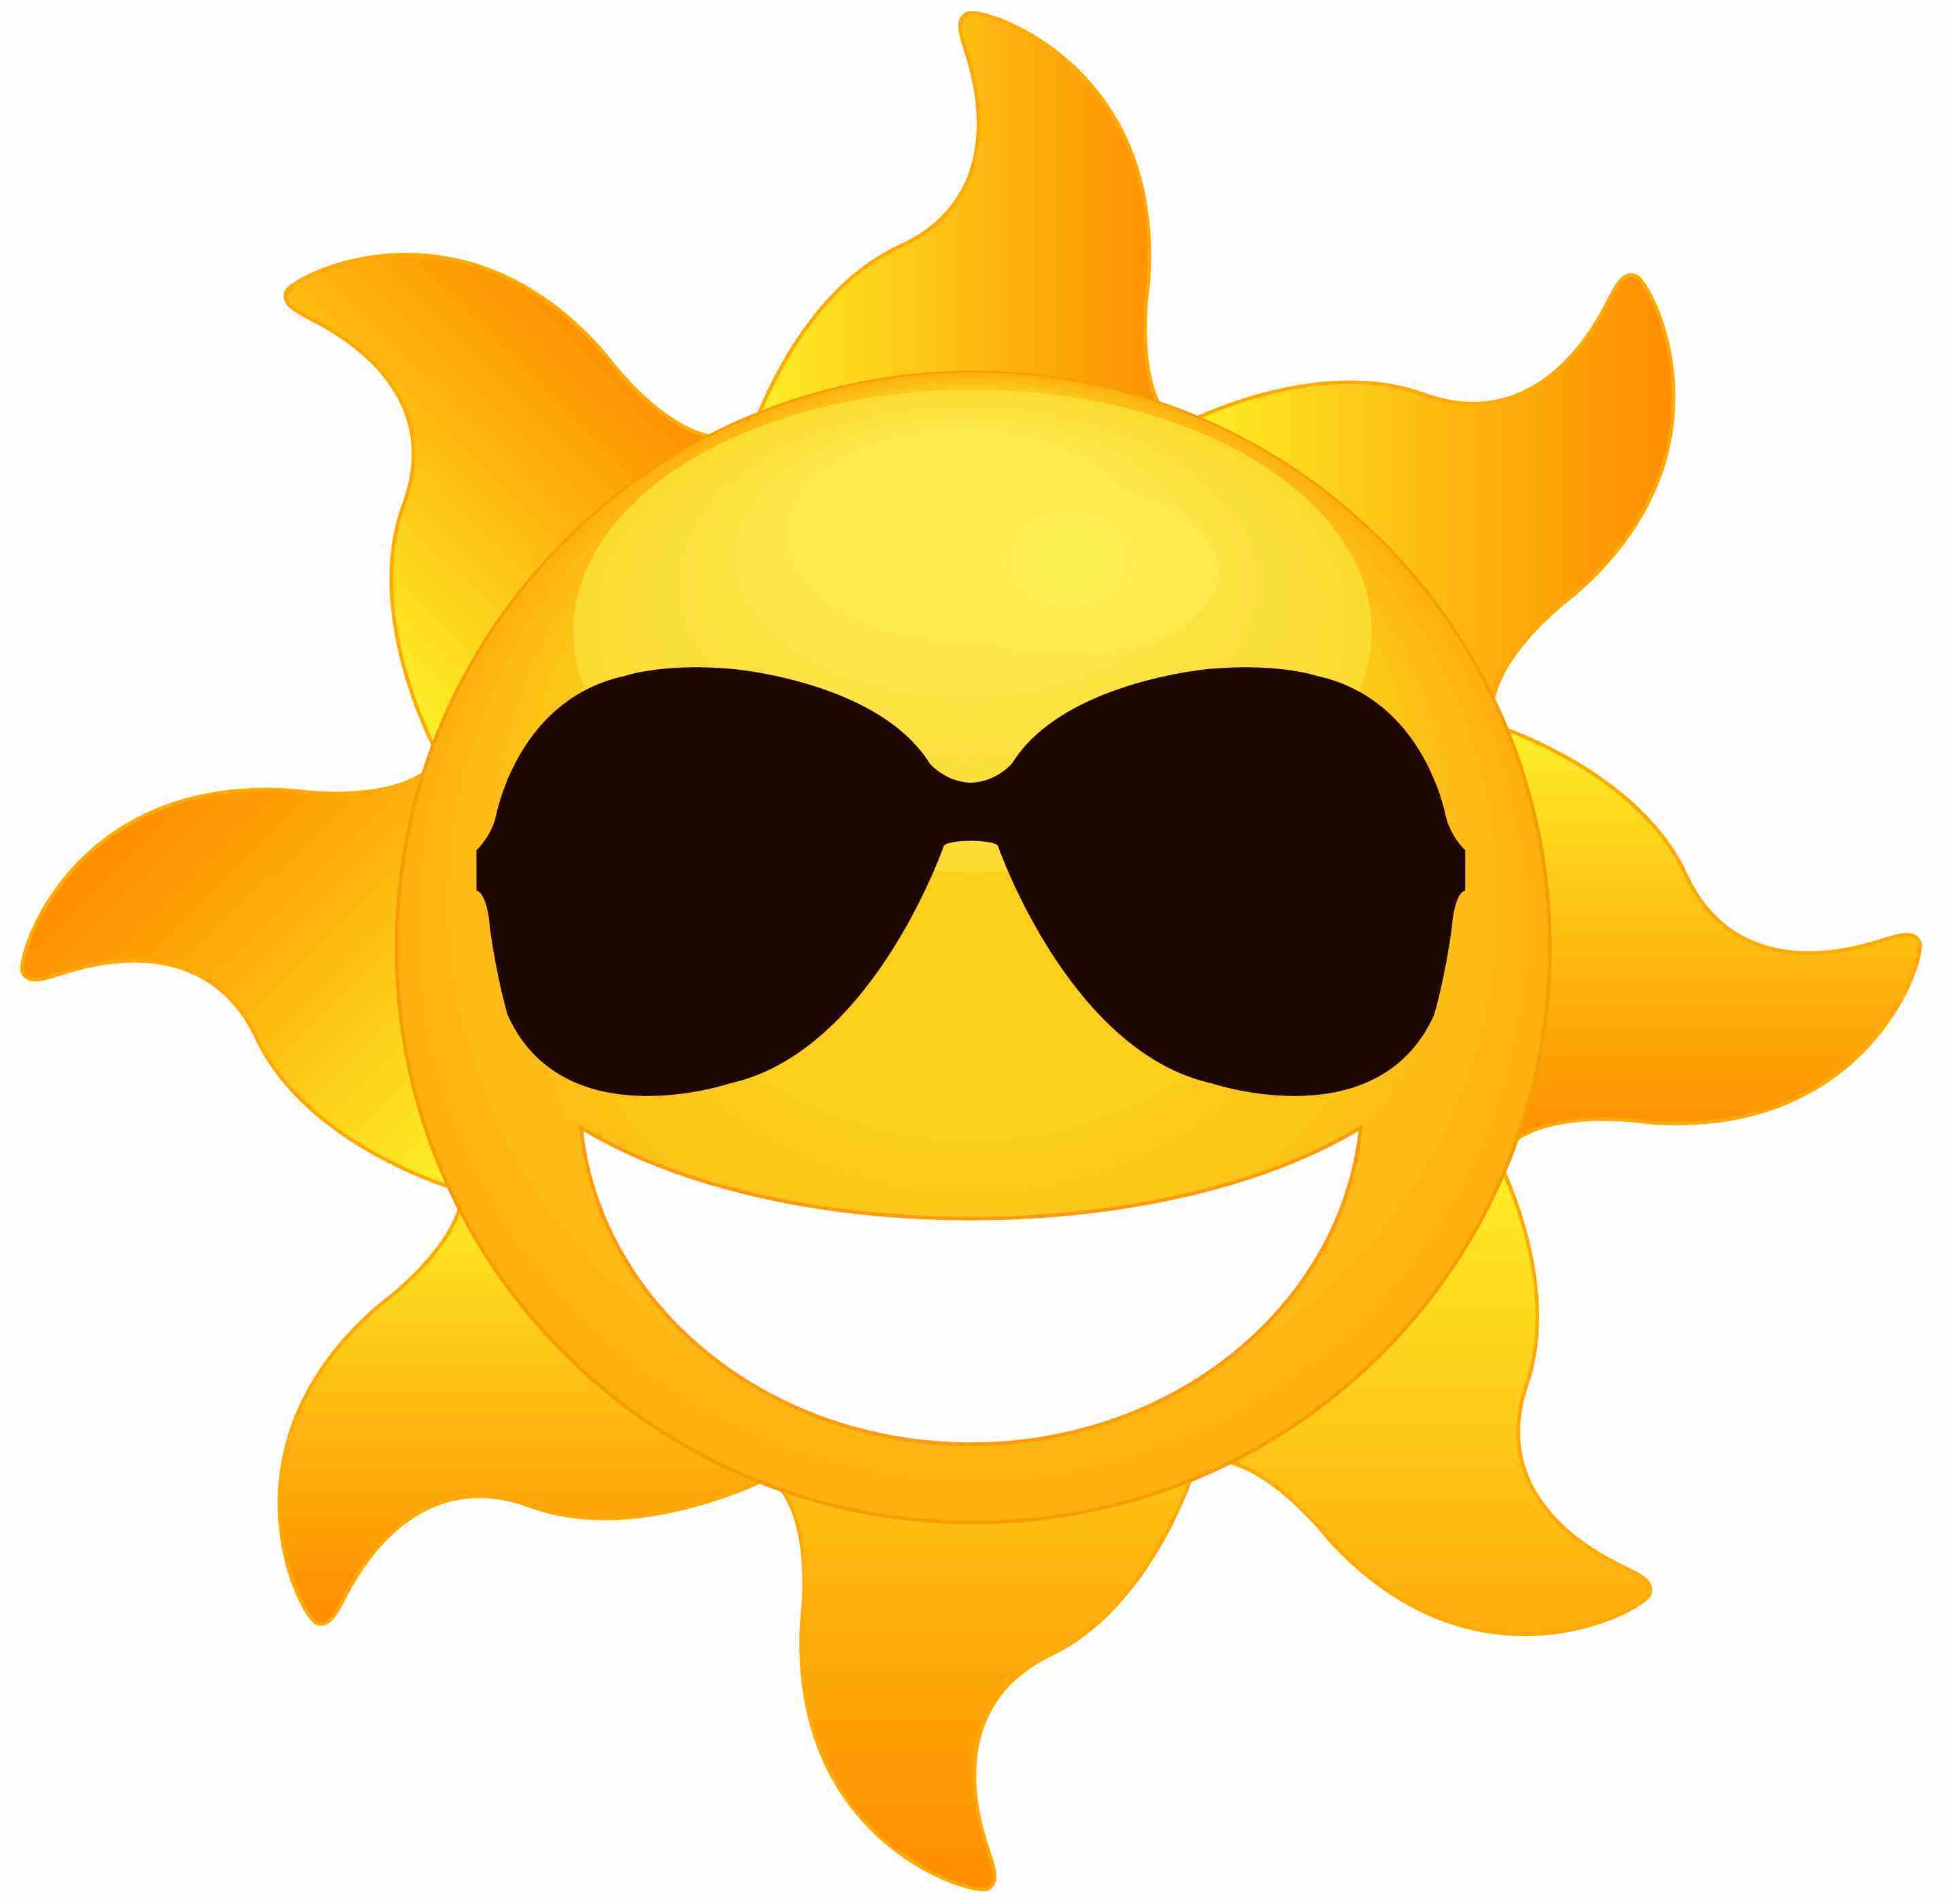 Sun Wearing Sunglasses Coloring Page.